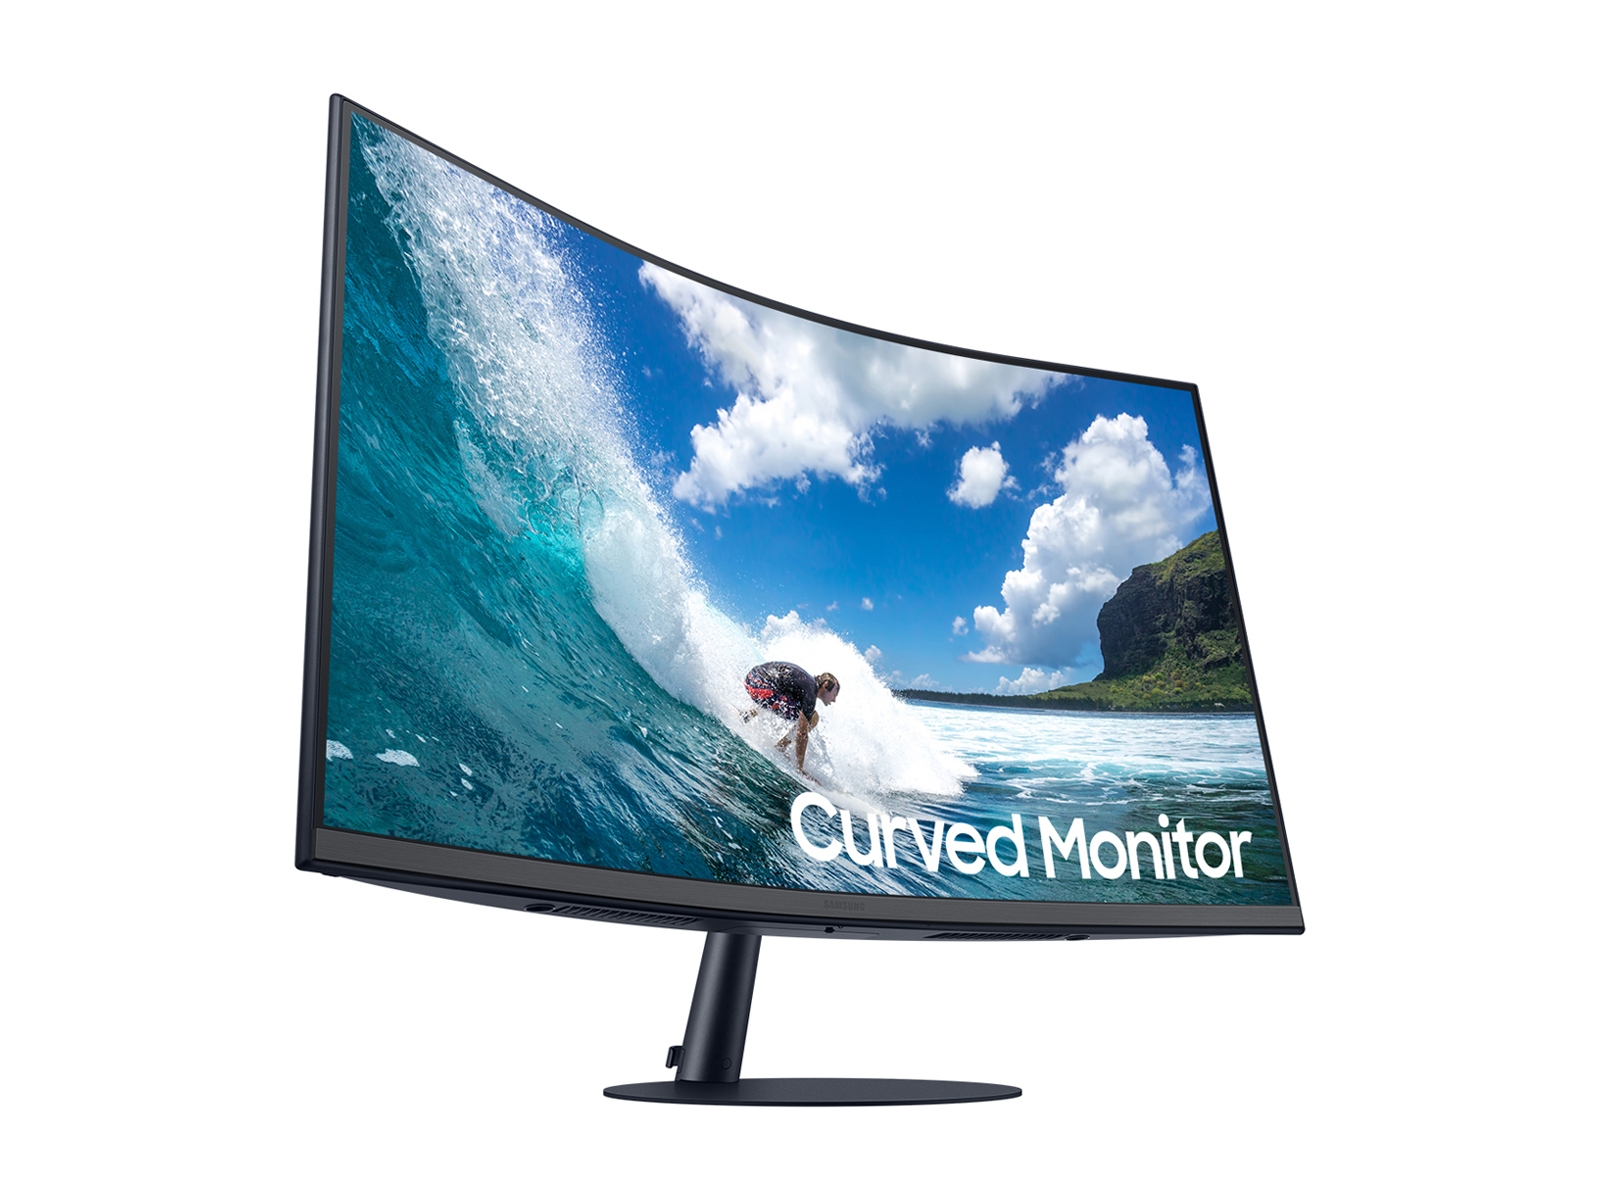 Samsung T55 Series 27 LED 1000R Curved FHD FreeSync Monitor with Speakers  (DisplayPort, HDMI, VGA) Black LC27T550FDNXZA - Best Buy